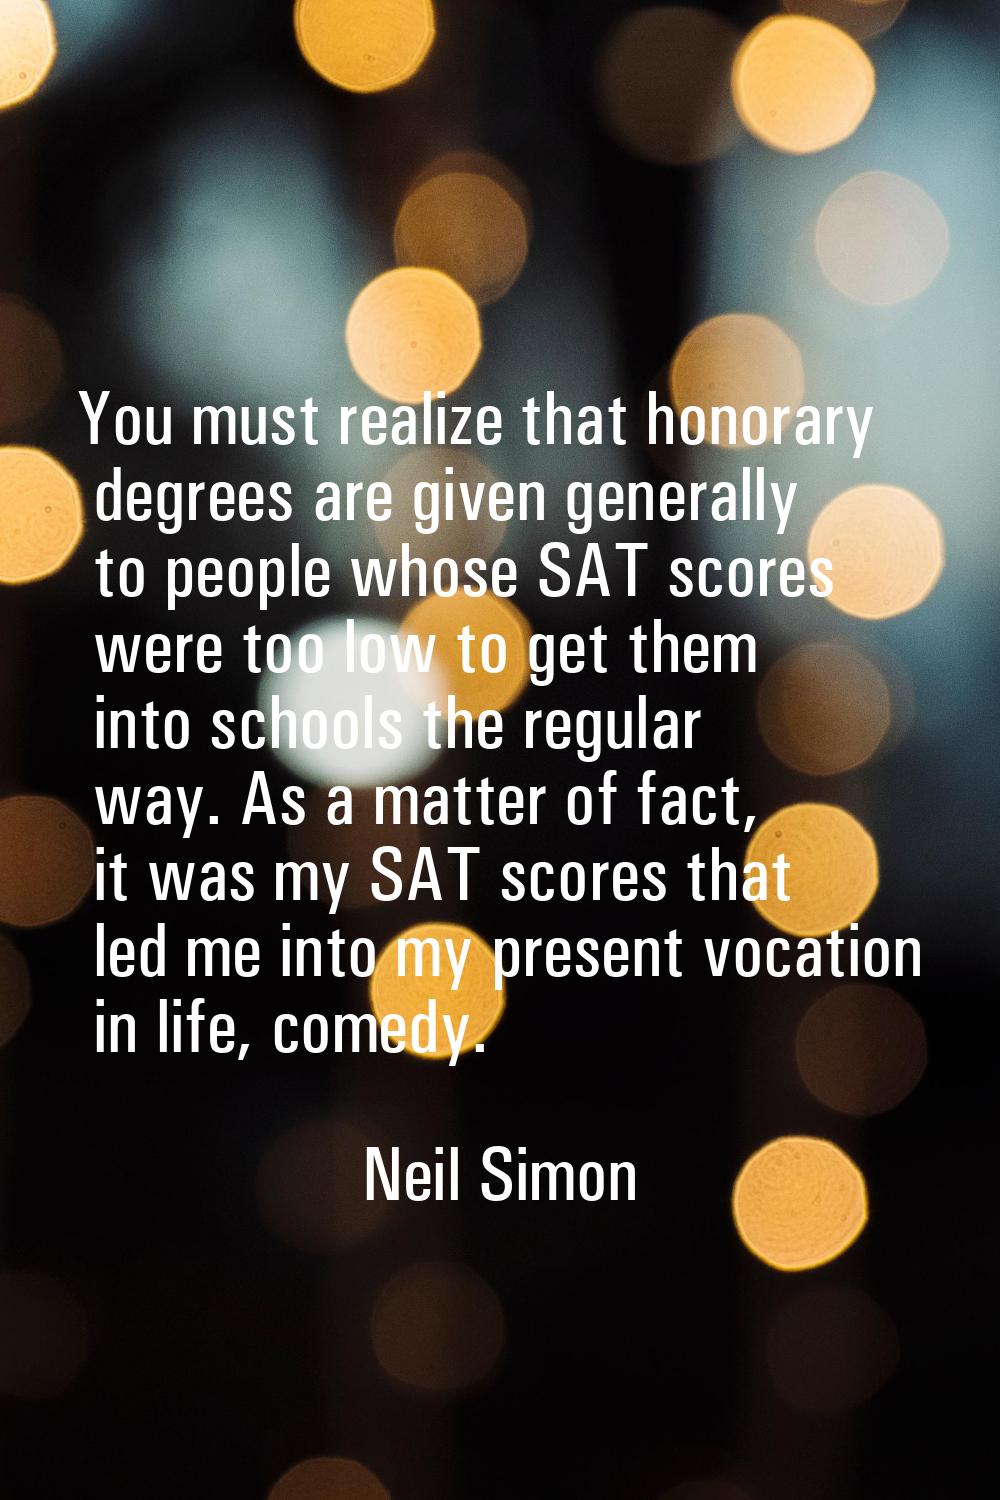 You must realize that honorary degrees are given generally to people whose SAT scores were too low 